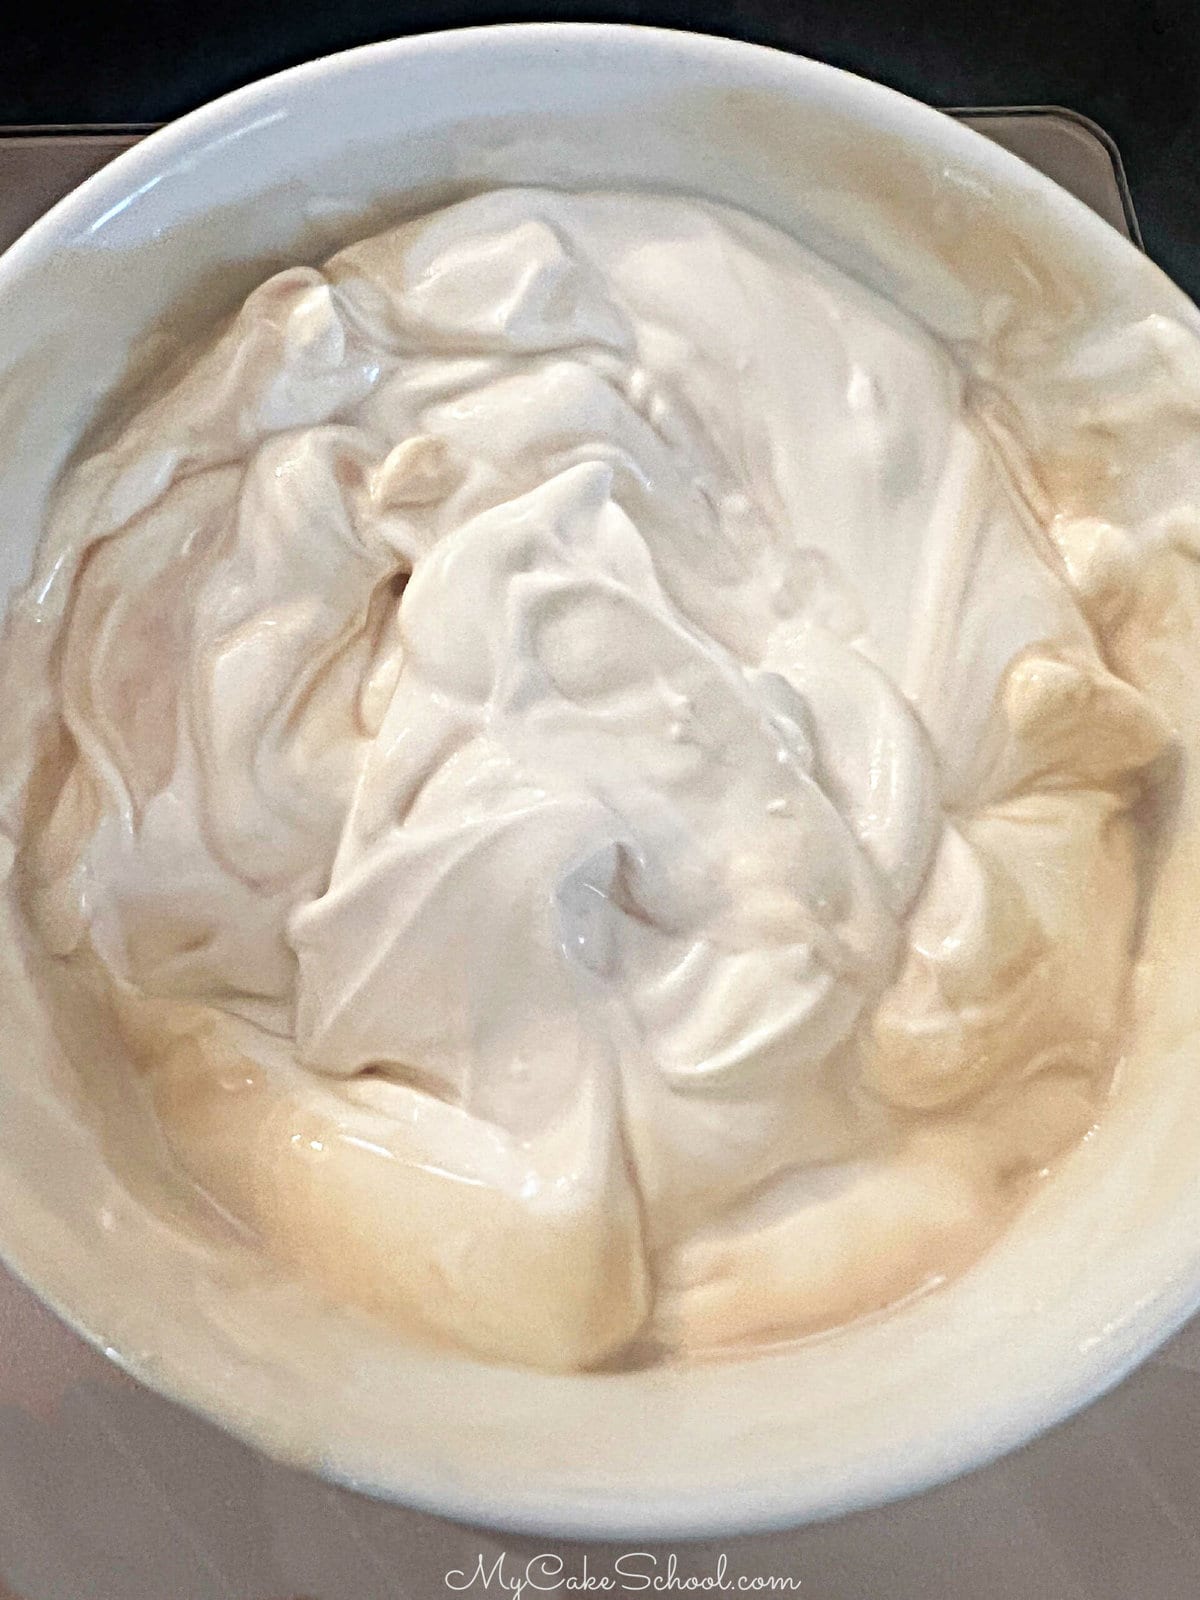 Bow of Sour Cream and Vanilla